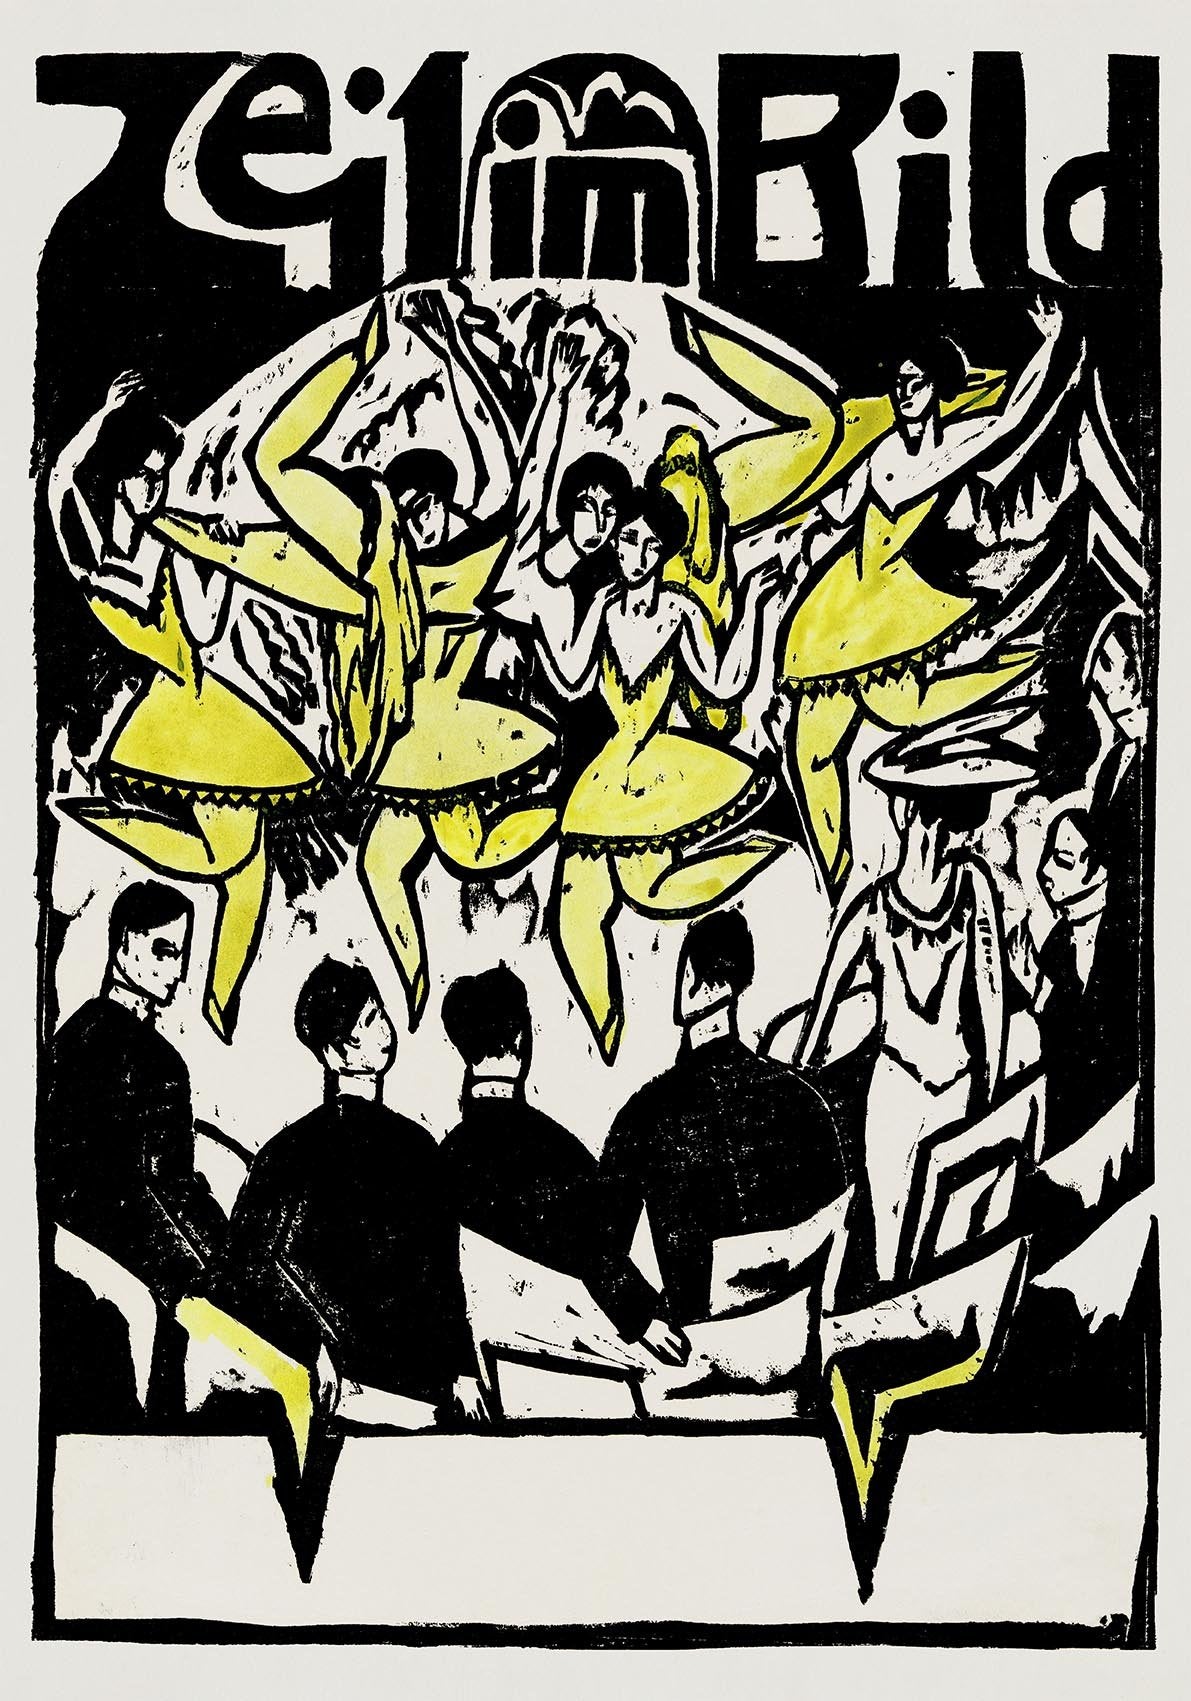 Dancers at the Ice Palace by Ernst Kirchner